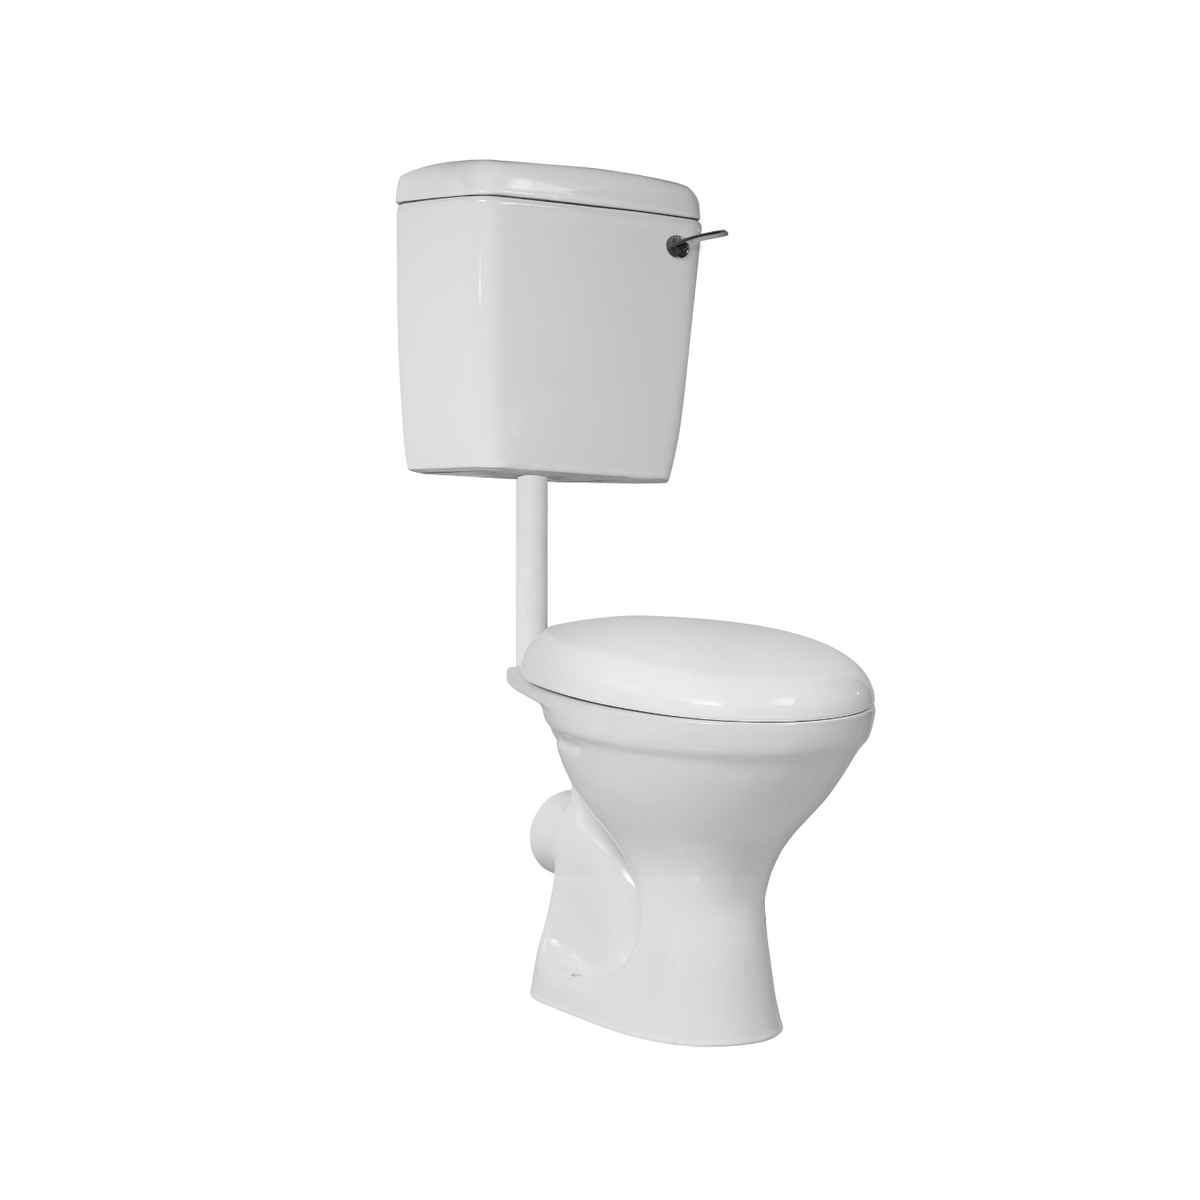 Kartell UK Berwick Low-Level WC Pan with Side Feed Cistern & Soft Close Seat